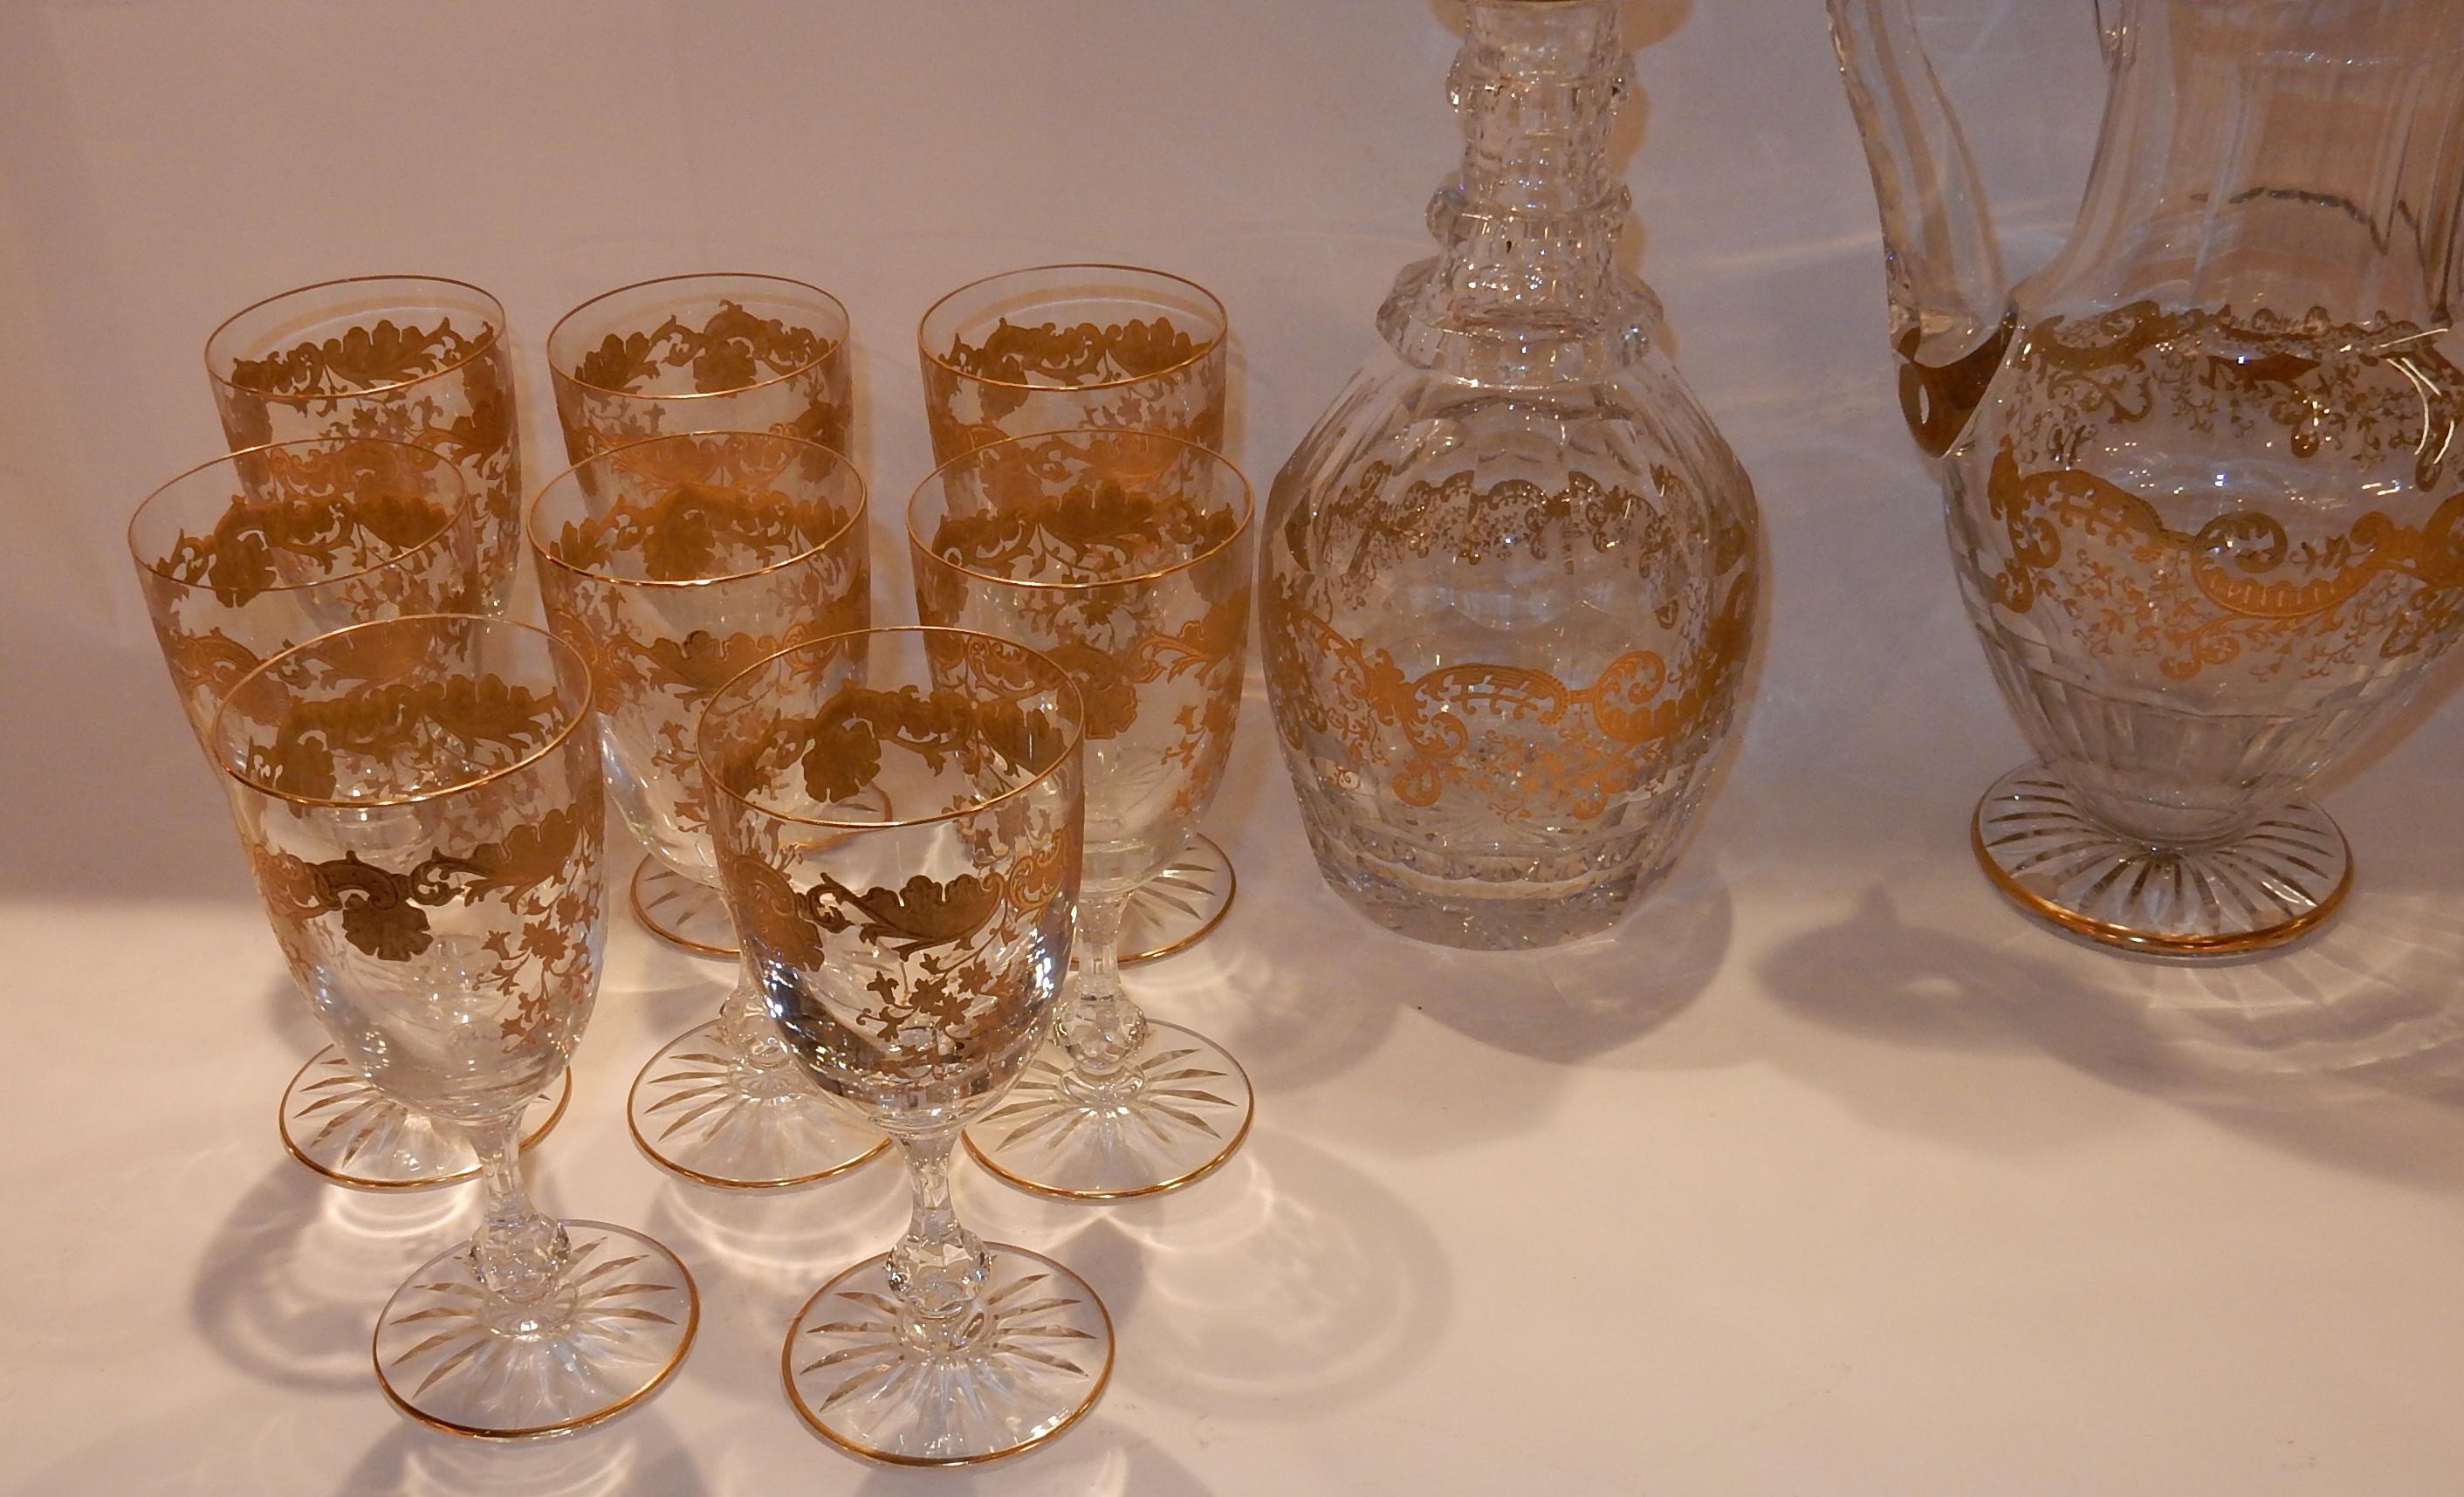 1950 Crystal Serveware From St Louis Trianon 22 Piéces Signed 1